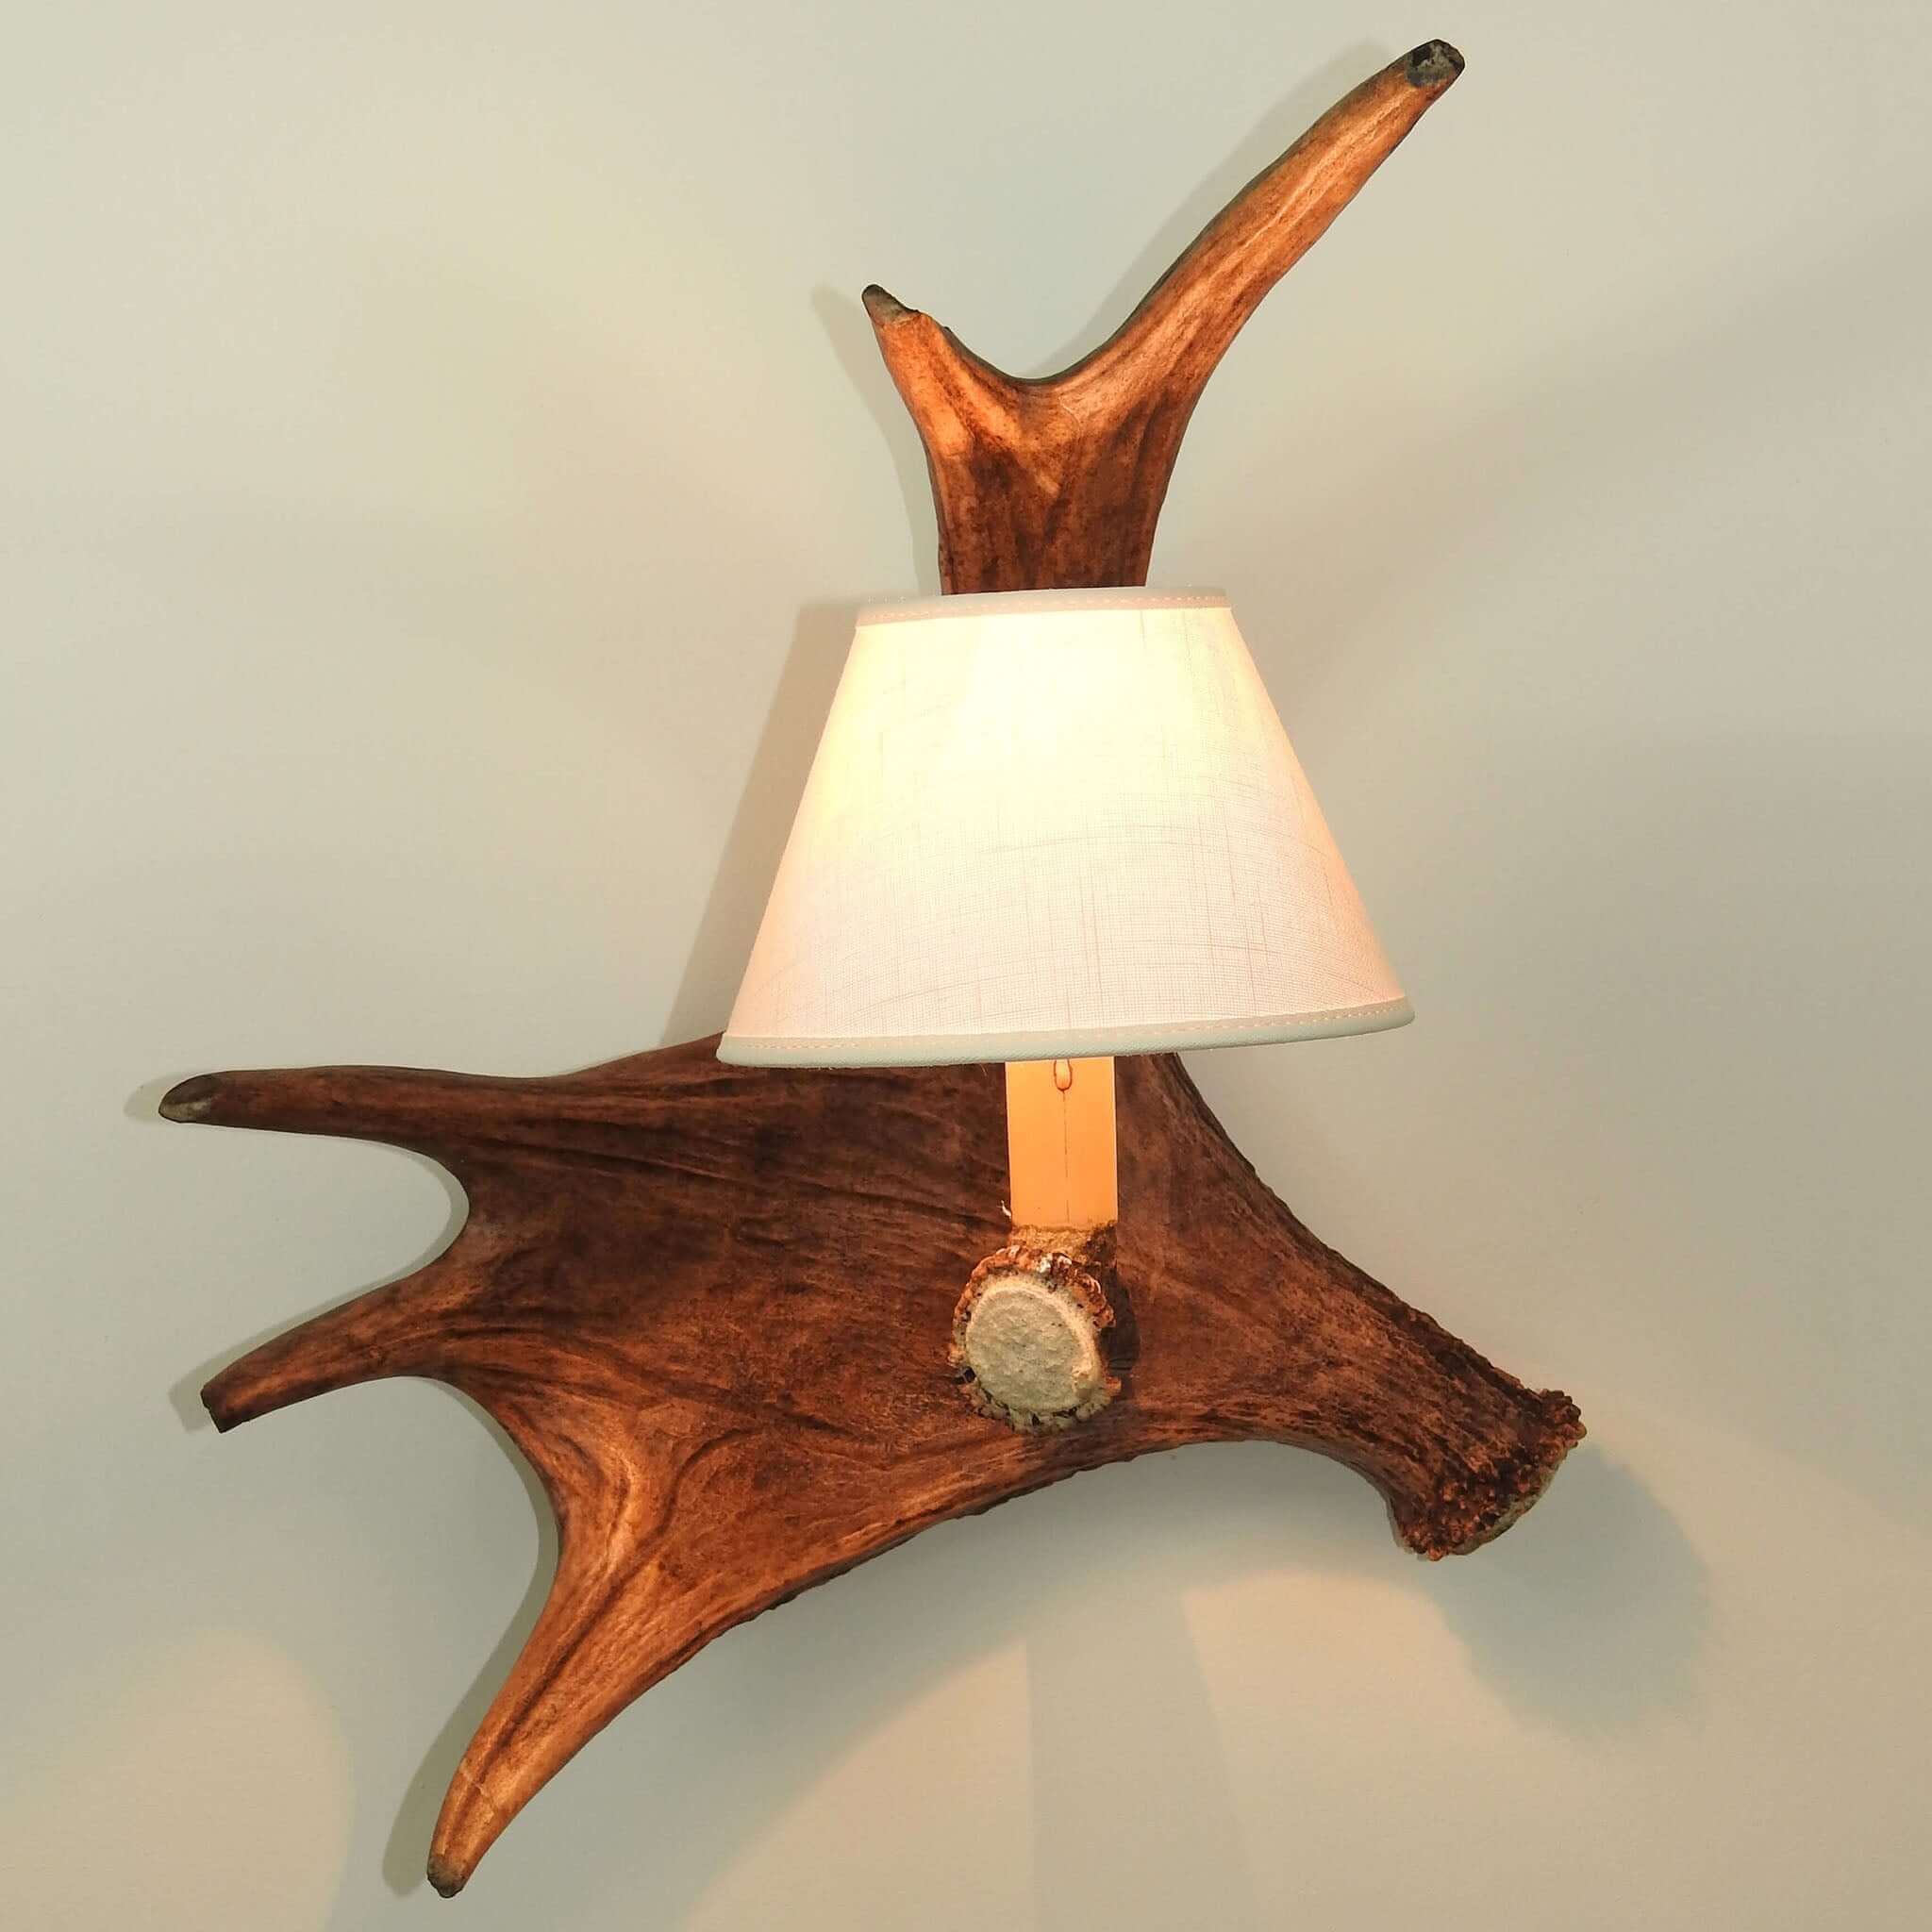 Real antler wall sconce.